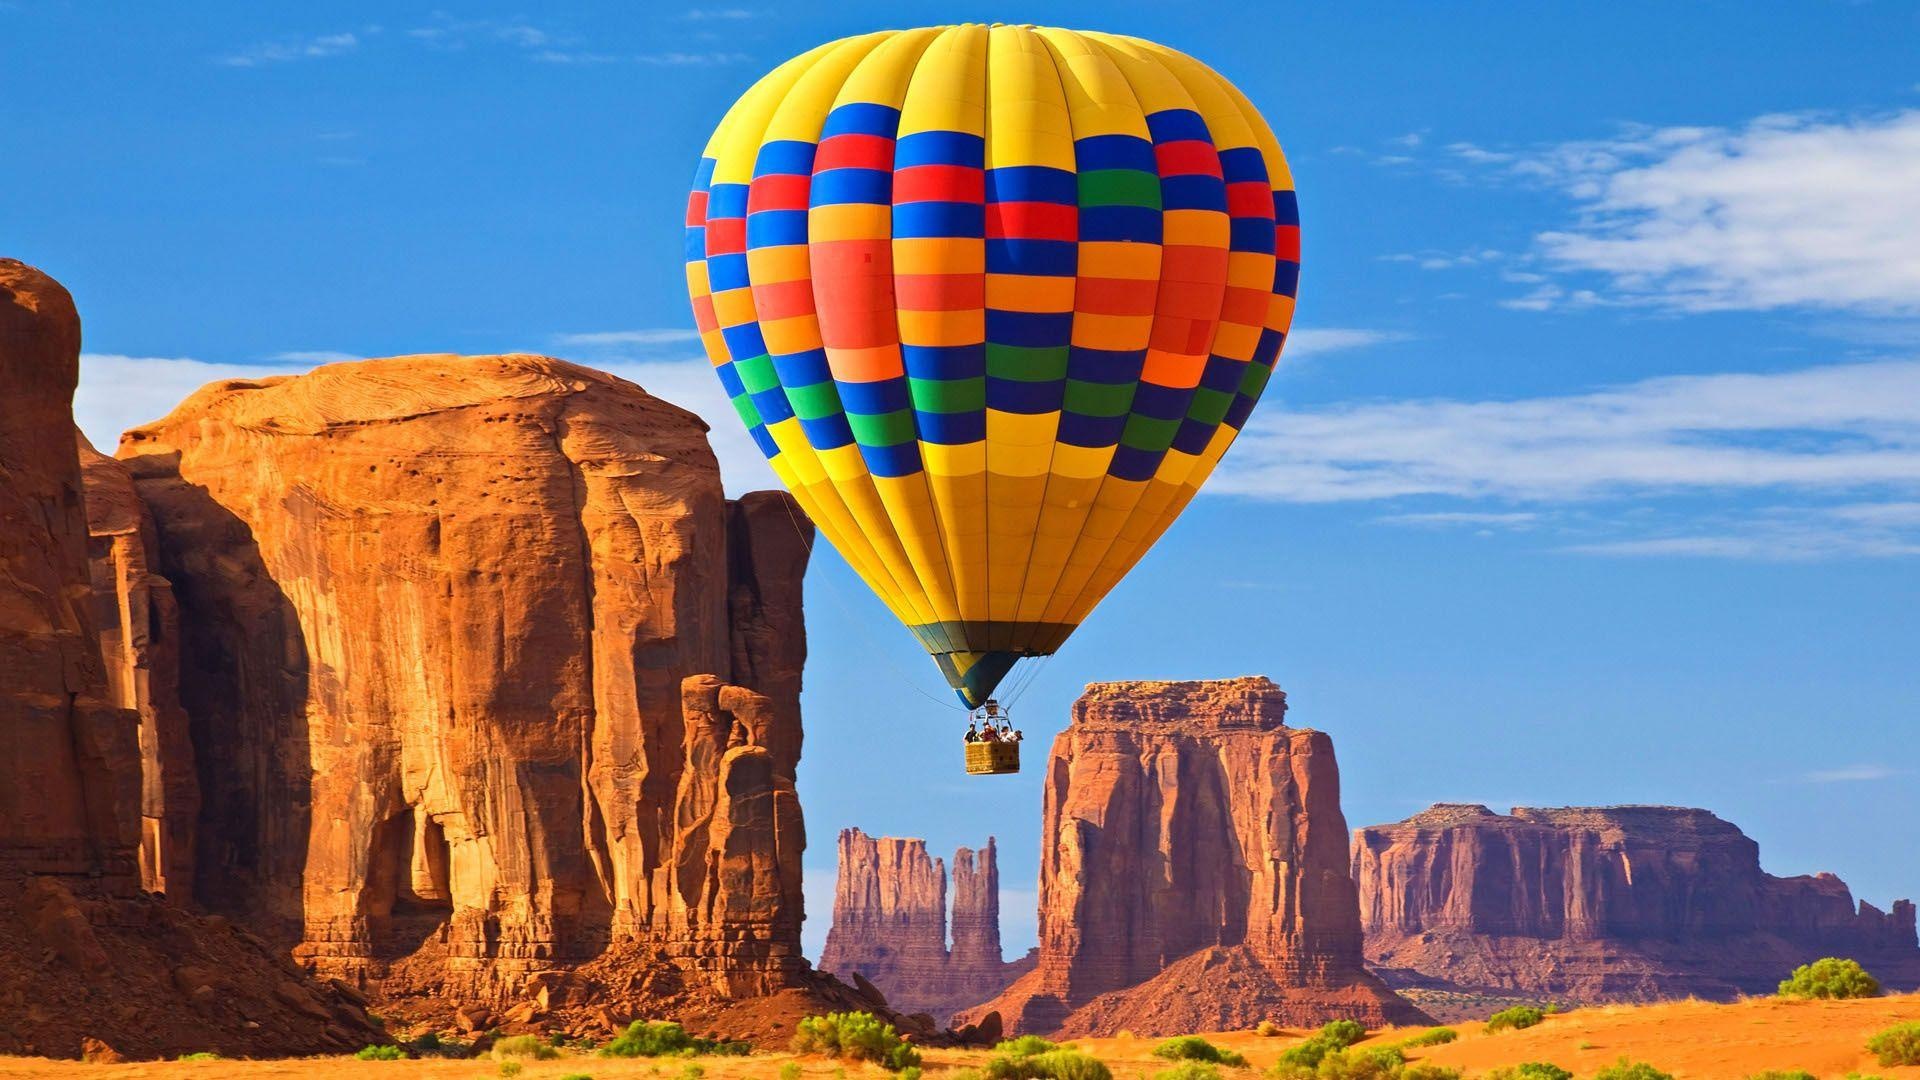 Hot Air Balloon: Arizona-Utah Border, Monument Valley, The Scenery Of An Old Western Movie. 1920x1080 Full HD Background.